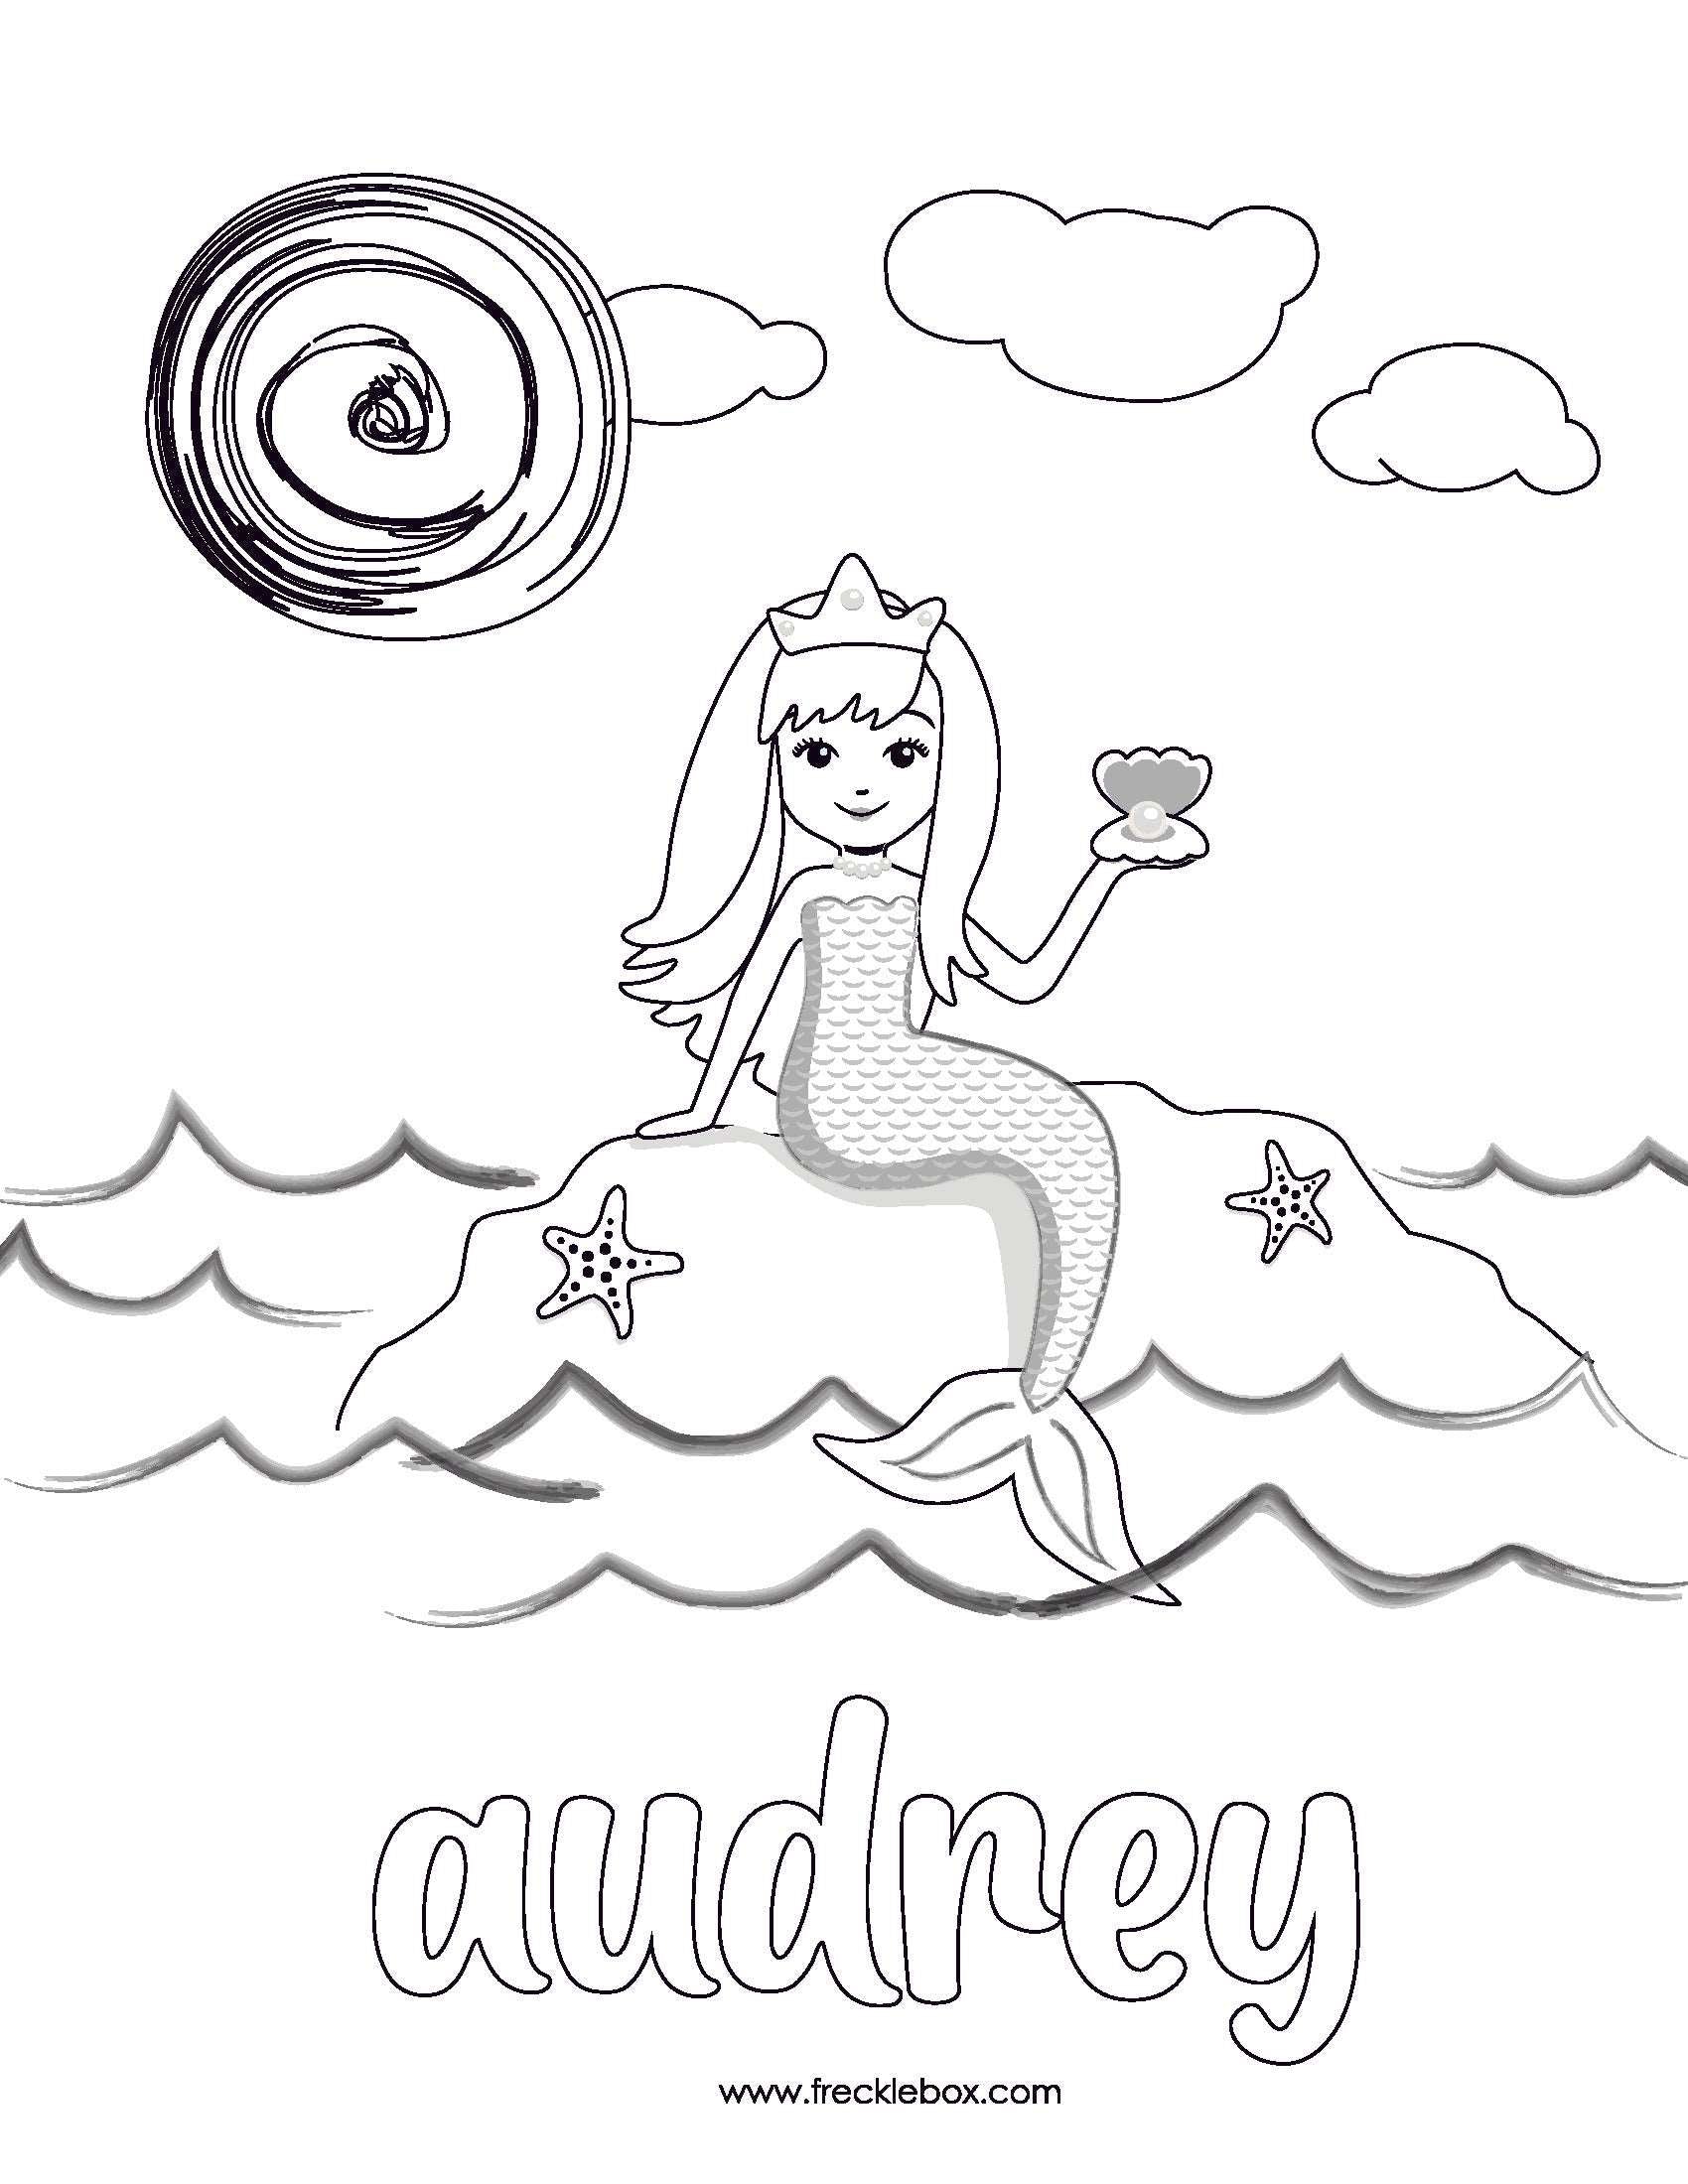 Free downloadable coloring page with mermaid, personalized with child's name.